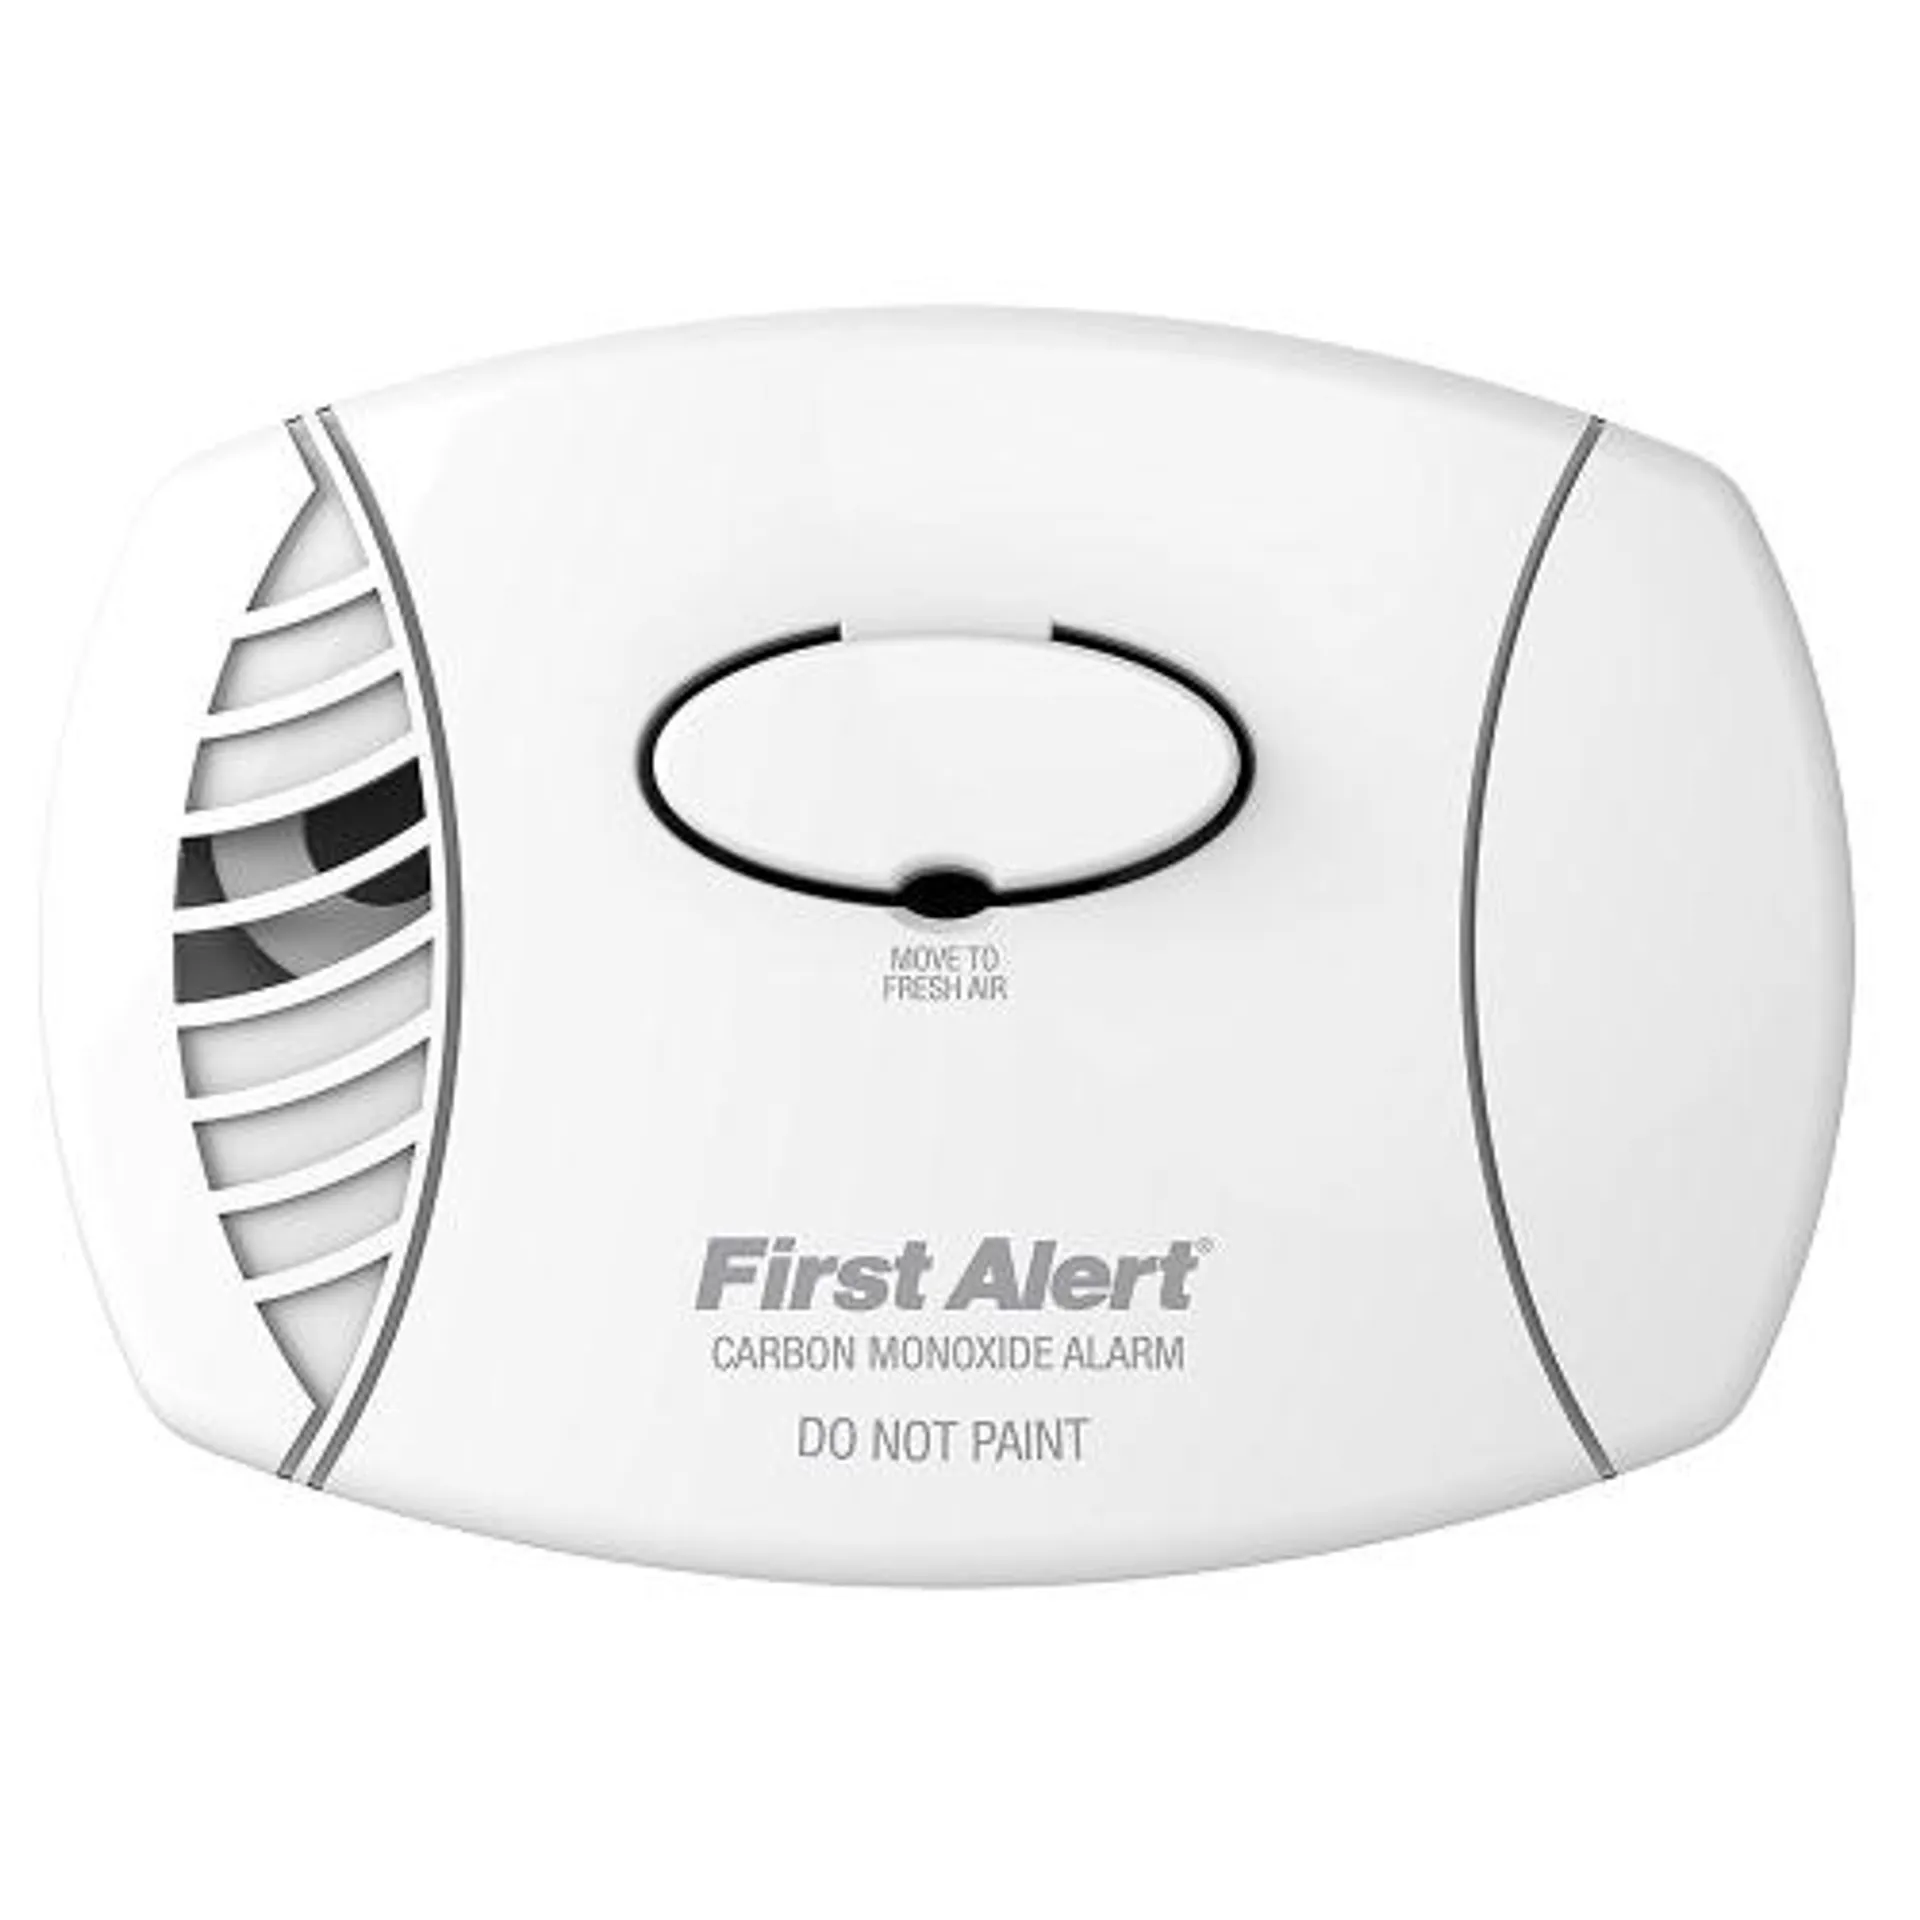 First Alert Basic Battery-Operated Carbon Monoxide Alarm